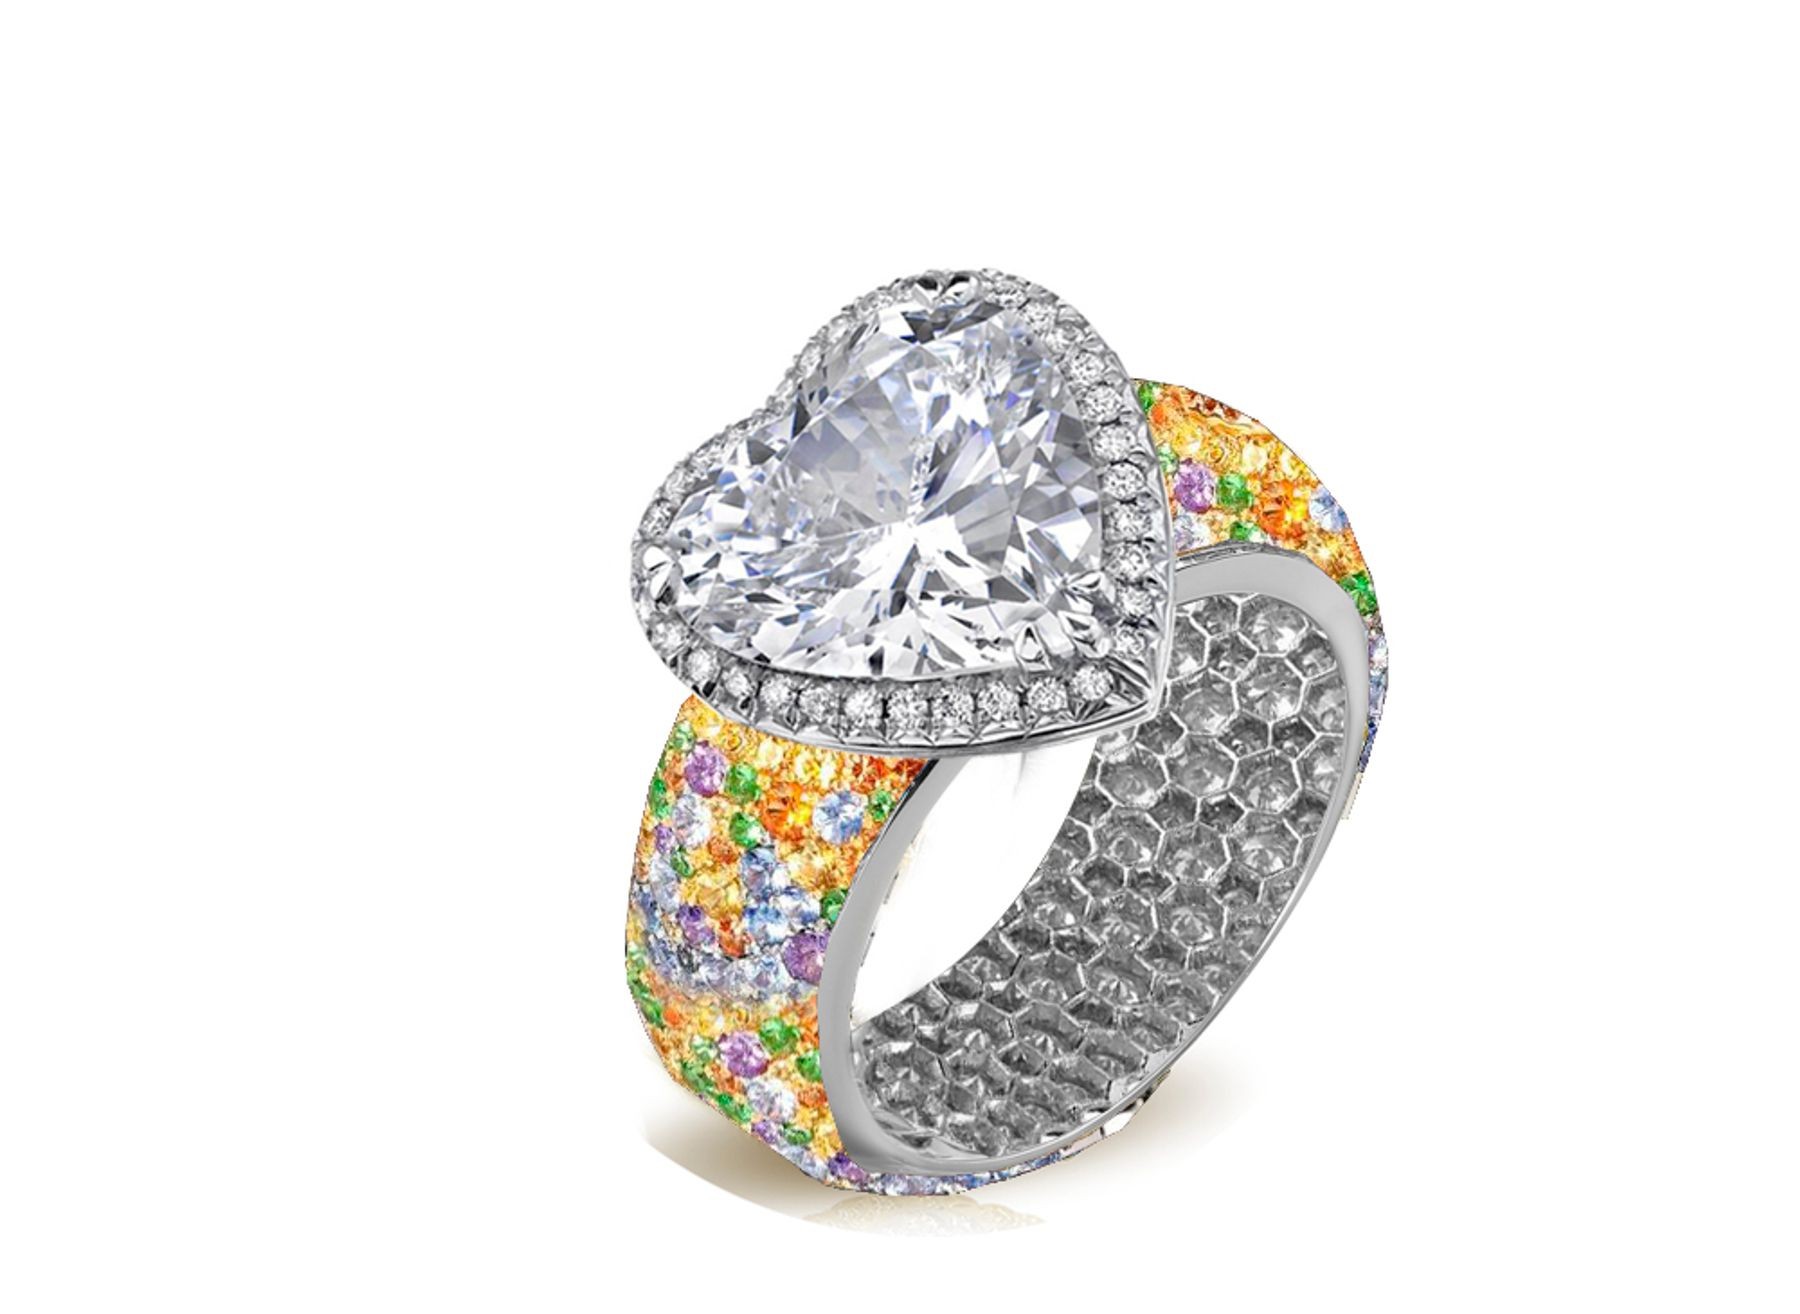 Halo Heart Diamond Ring with Diamonds & Colored Gemstones in Gold or Platinum